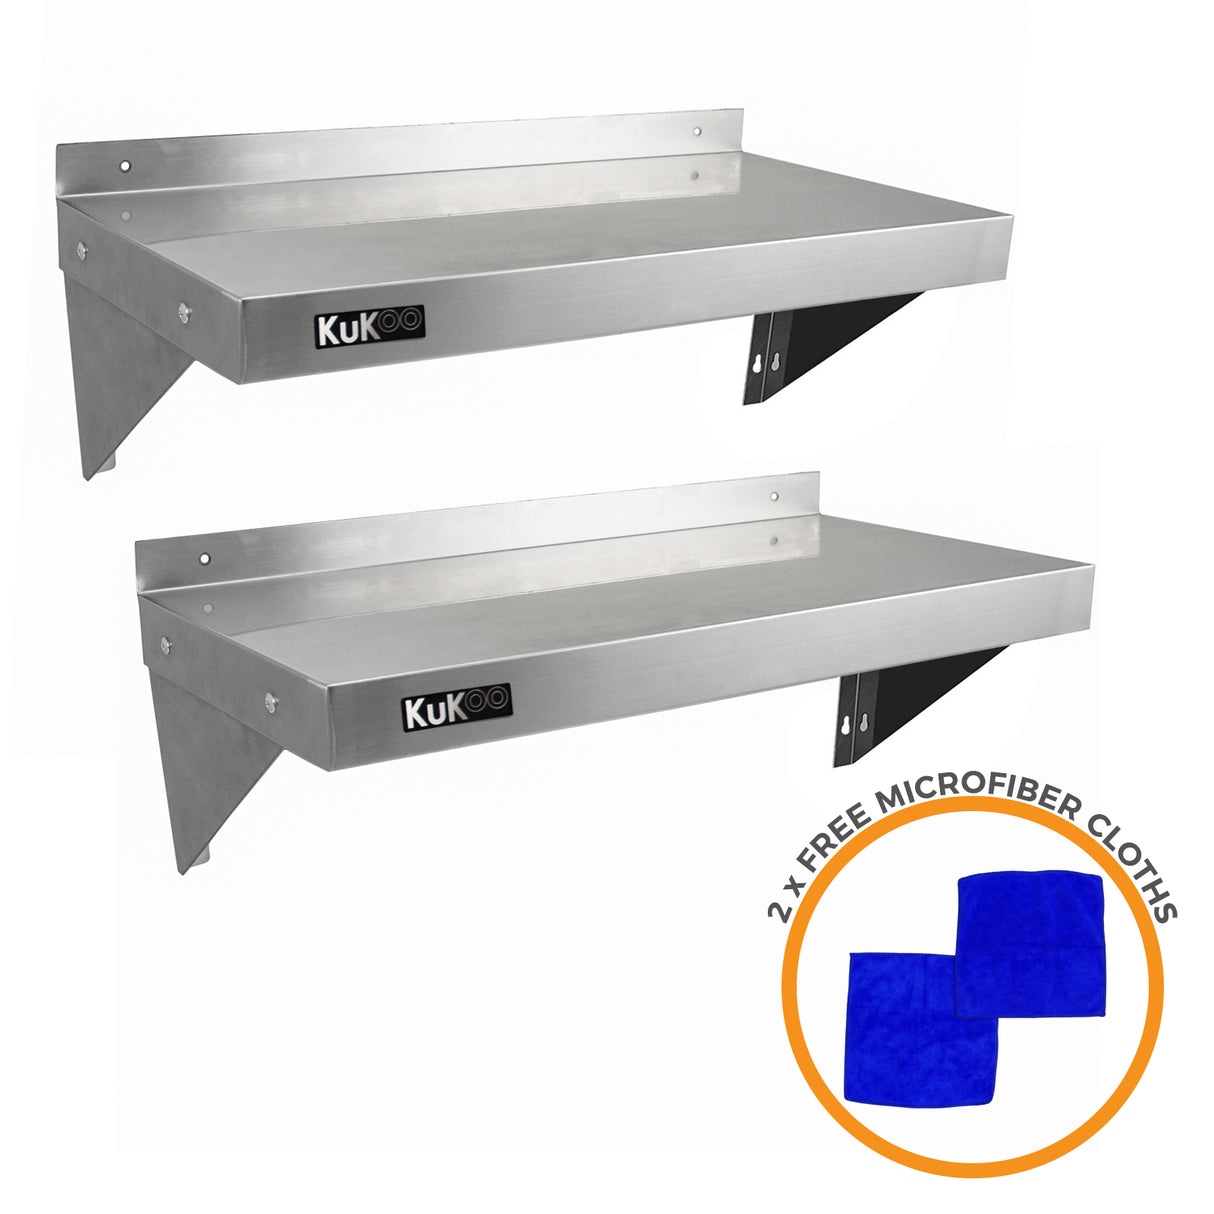 2 x KuKoo Stainless Steel Shelves 900mm x 300mm - Used - Acceptable